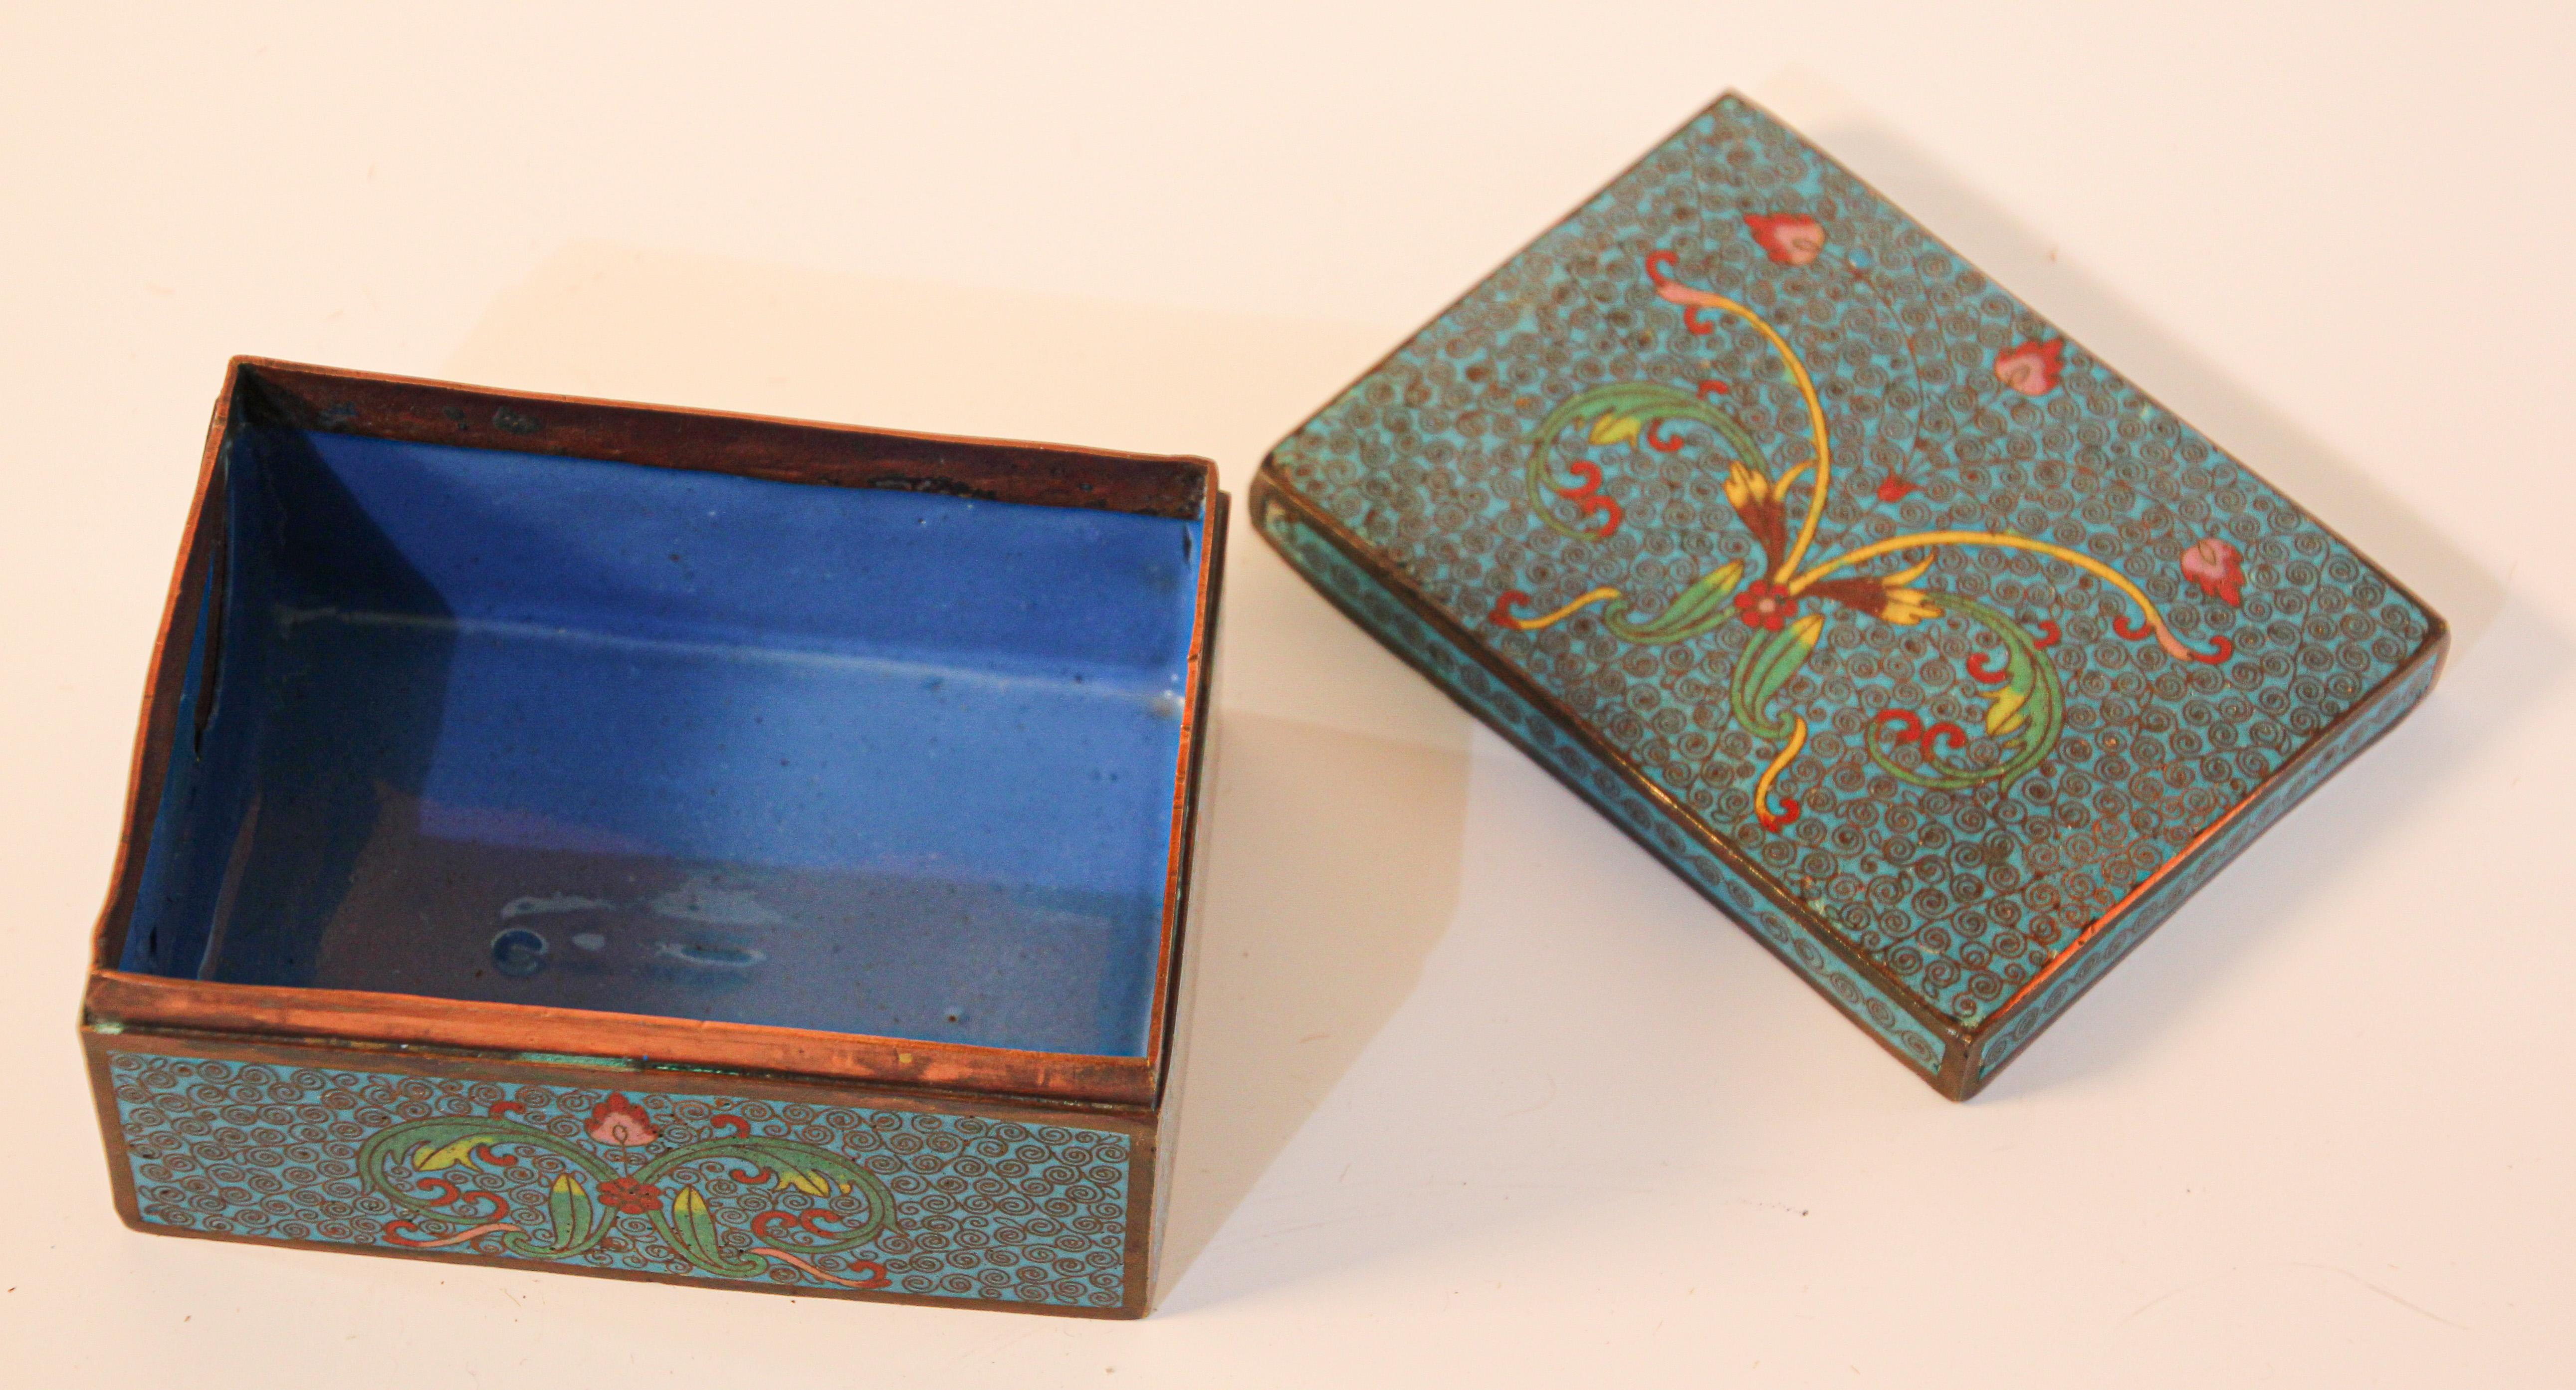 Vintage metal trinket box with hand painted Asian floral on blue background.
Metal brass box hand painted in blue colors.
Dimensions: Width 3.5, depth 4.5, height 2.25 in.
Rectangular shape beautiful collectible Asian box.